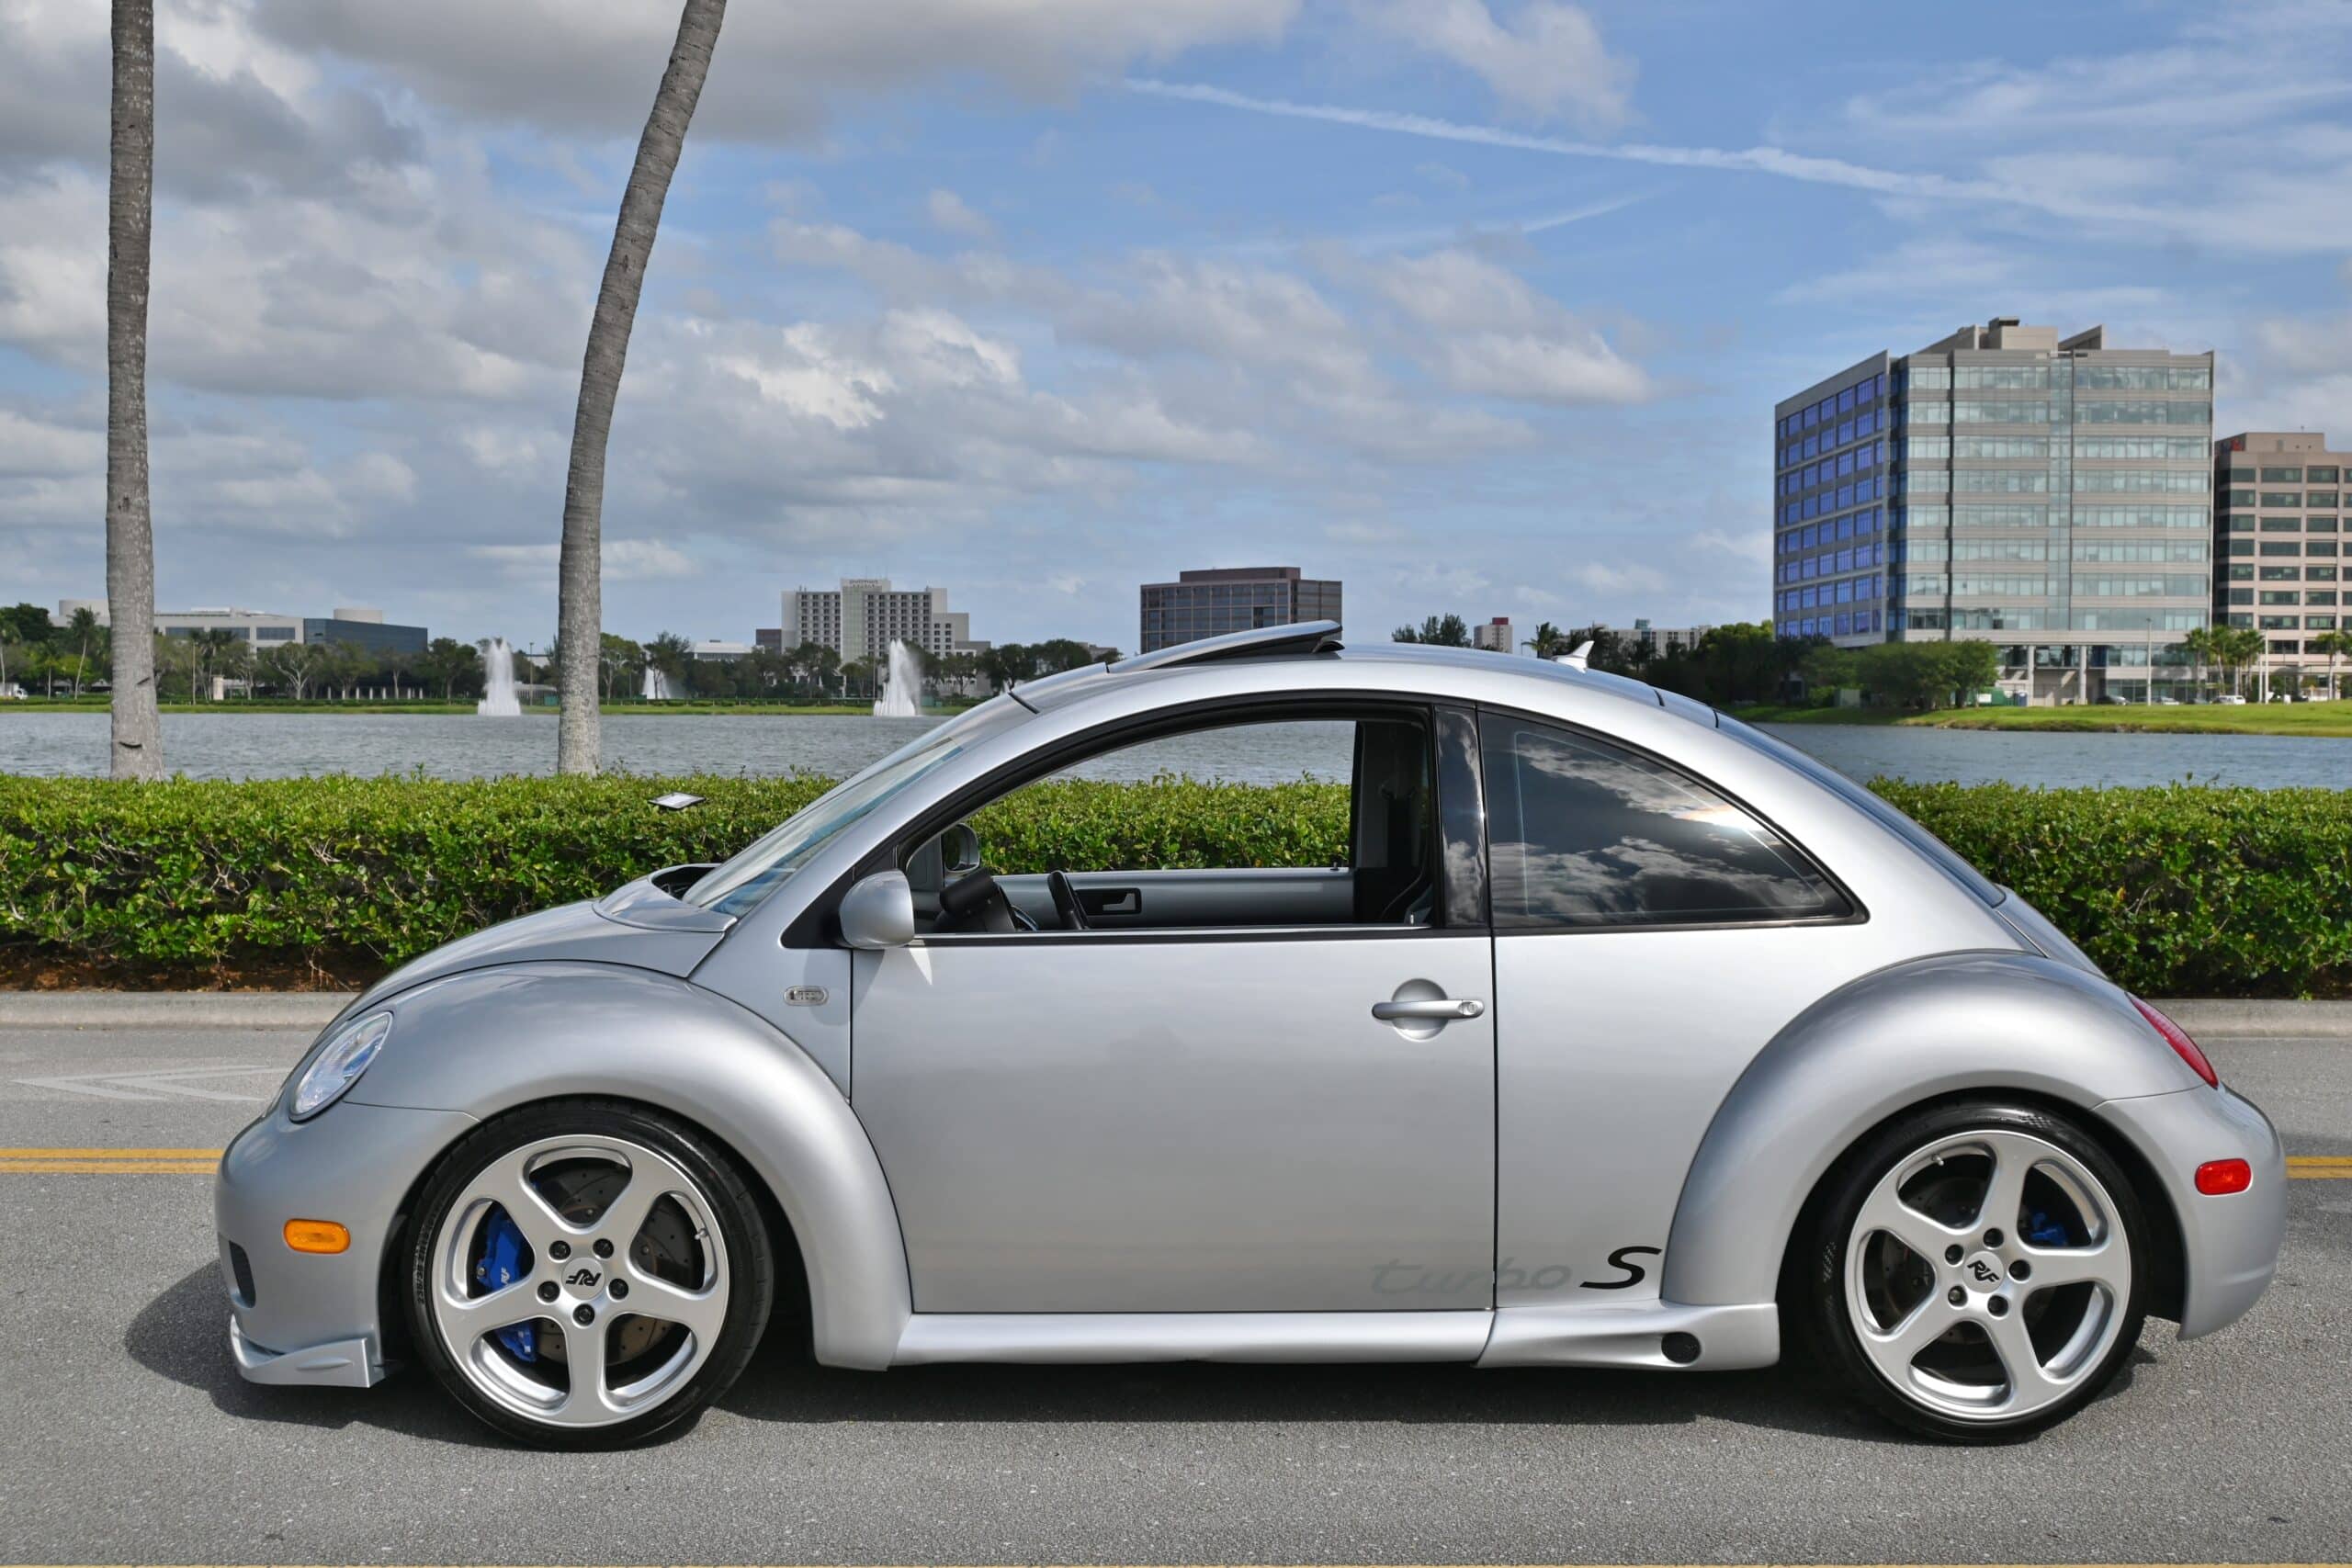 2002 Volkswagen Beetle RUF Turbo S 1 of 1 Built in collaboration with RUF / 6 Speed Manual / Custom RUF Modified